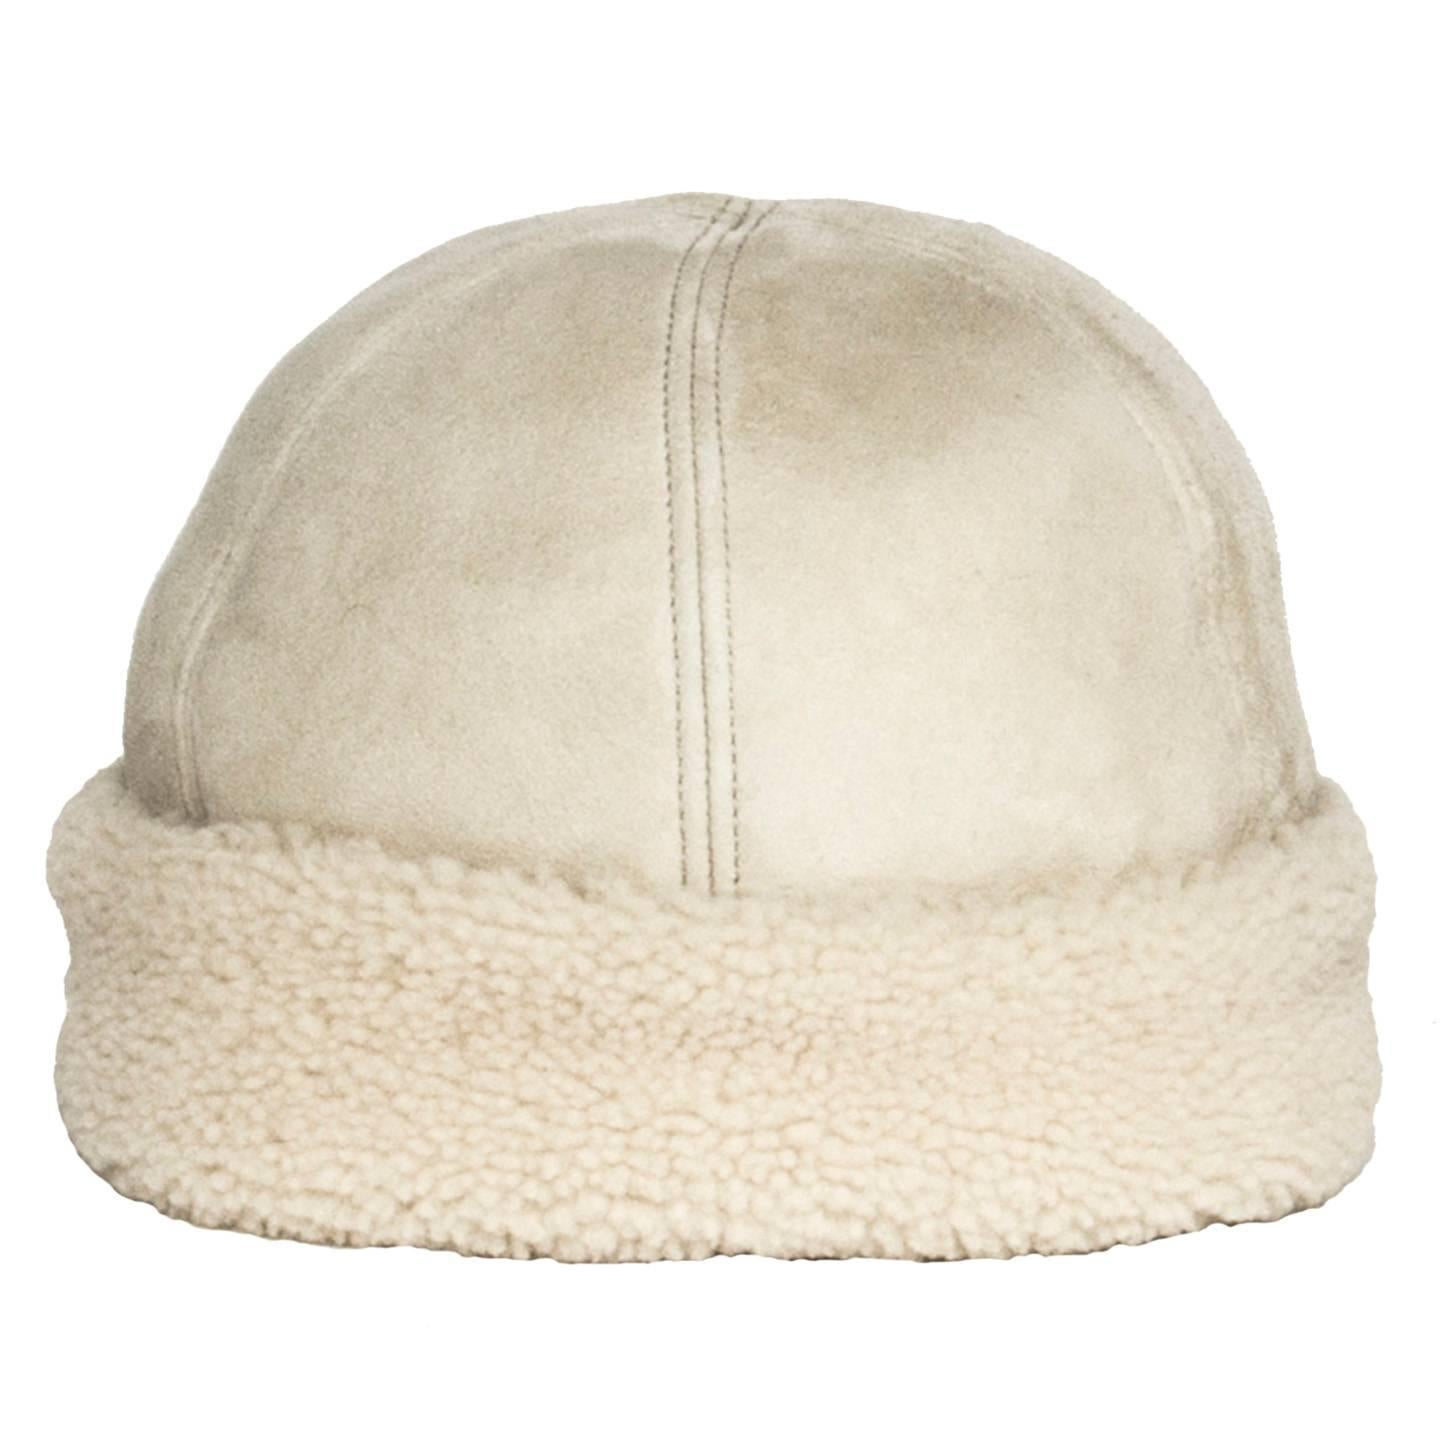 Prada ivory dyed sheep leather hat with suede exterior and shearling interior and turn-up.

Size  L Universal sizing

Condition  Excellent: never worn